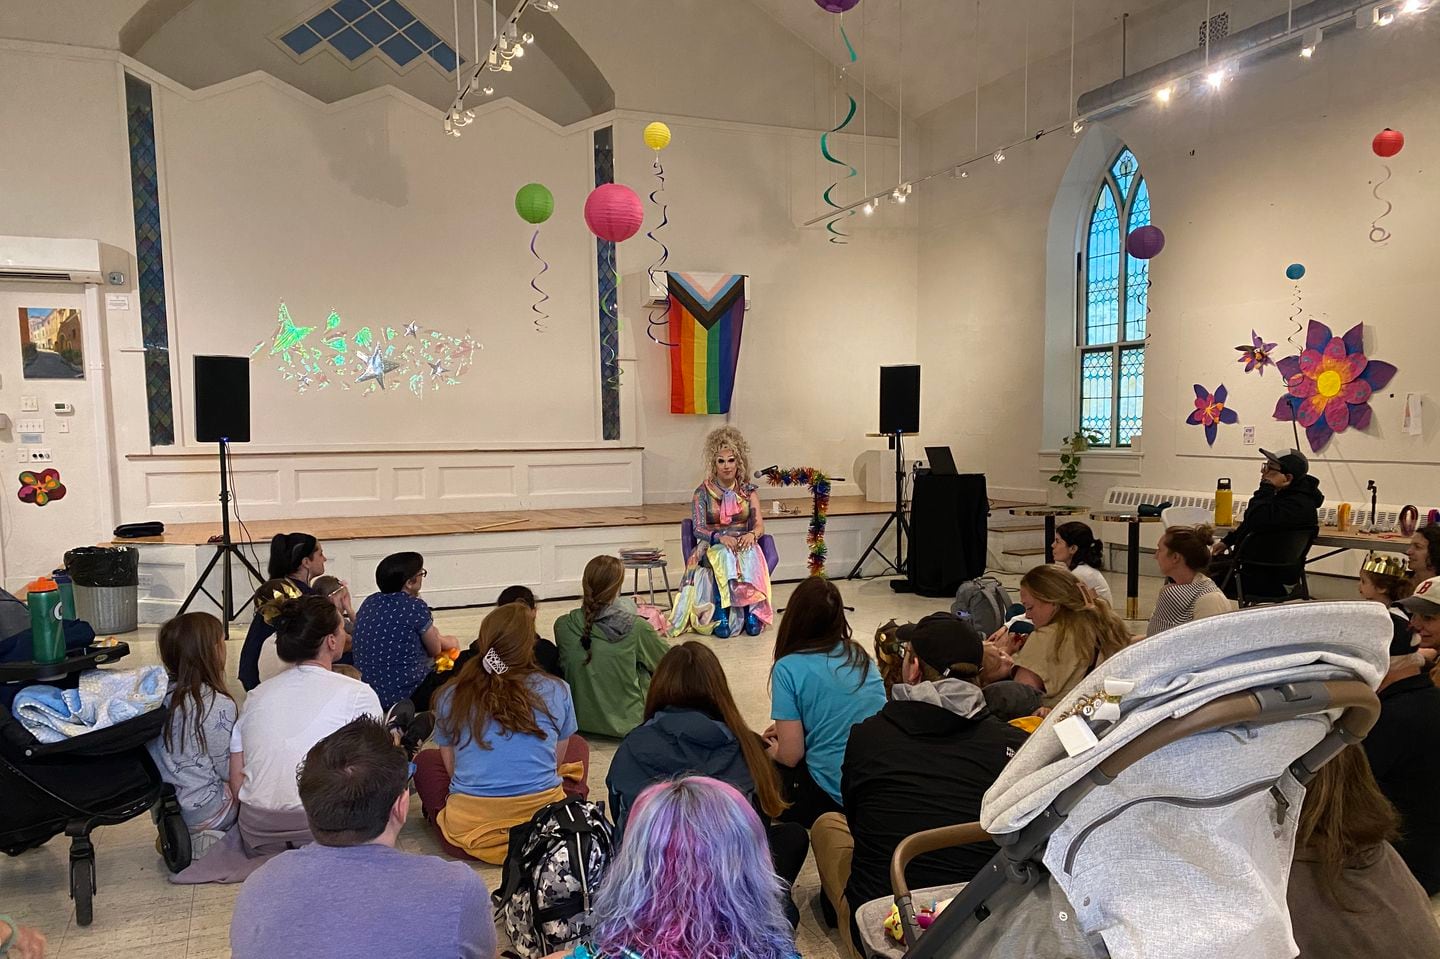 Drag performer Missy Steak during Sunday's Drag Queen Story Hour at the New Art Center in Newton.